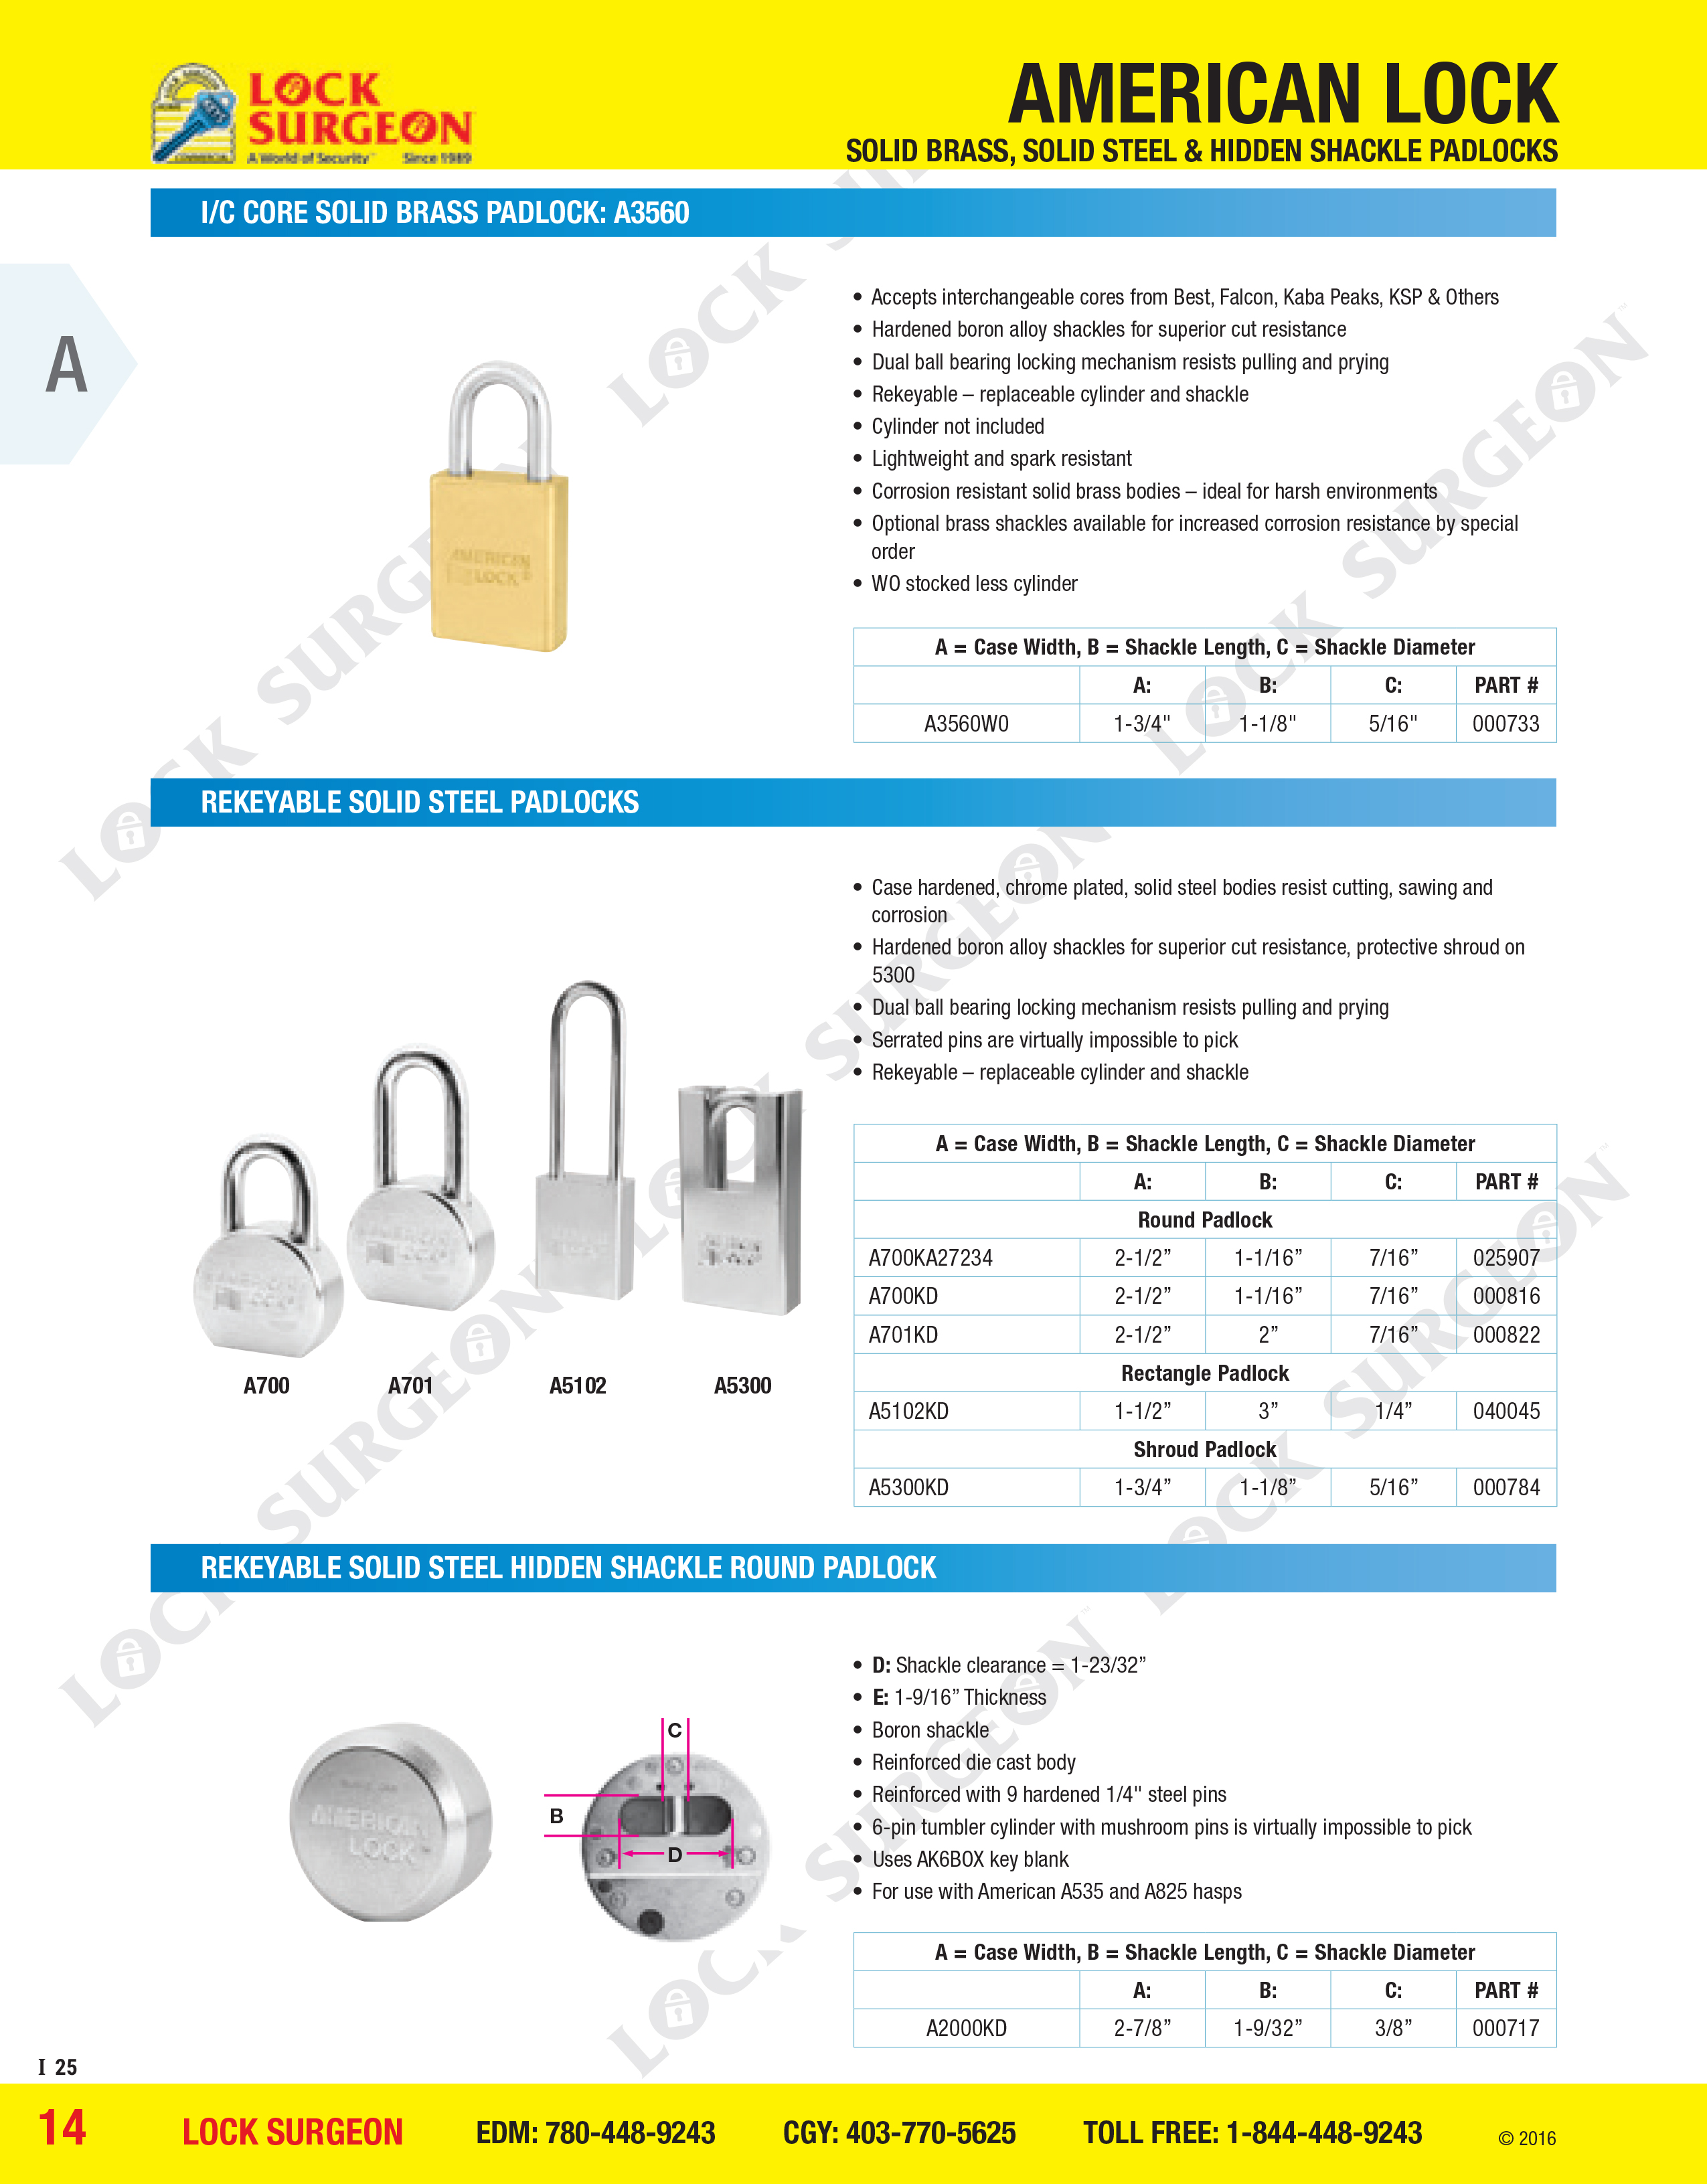 IC-Core solid brass padlock A3560, Rekeyable solid steel and hidden shackle round padlock